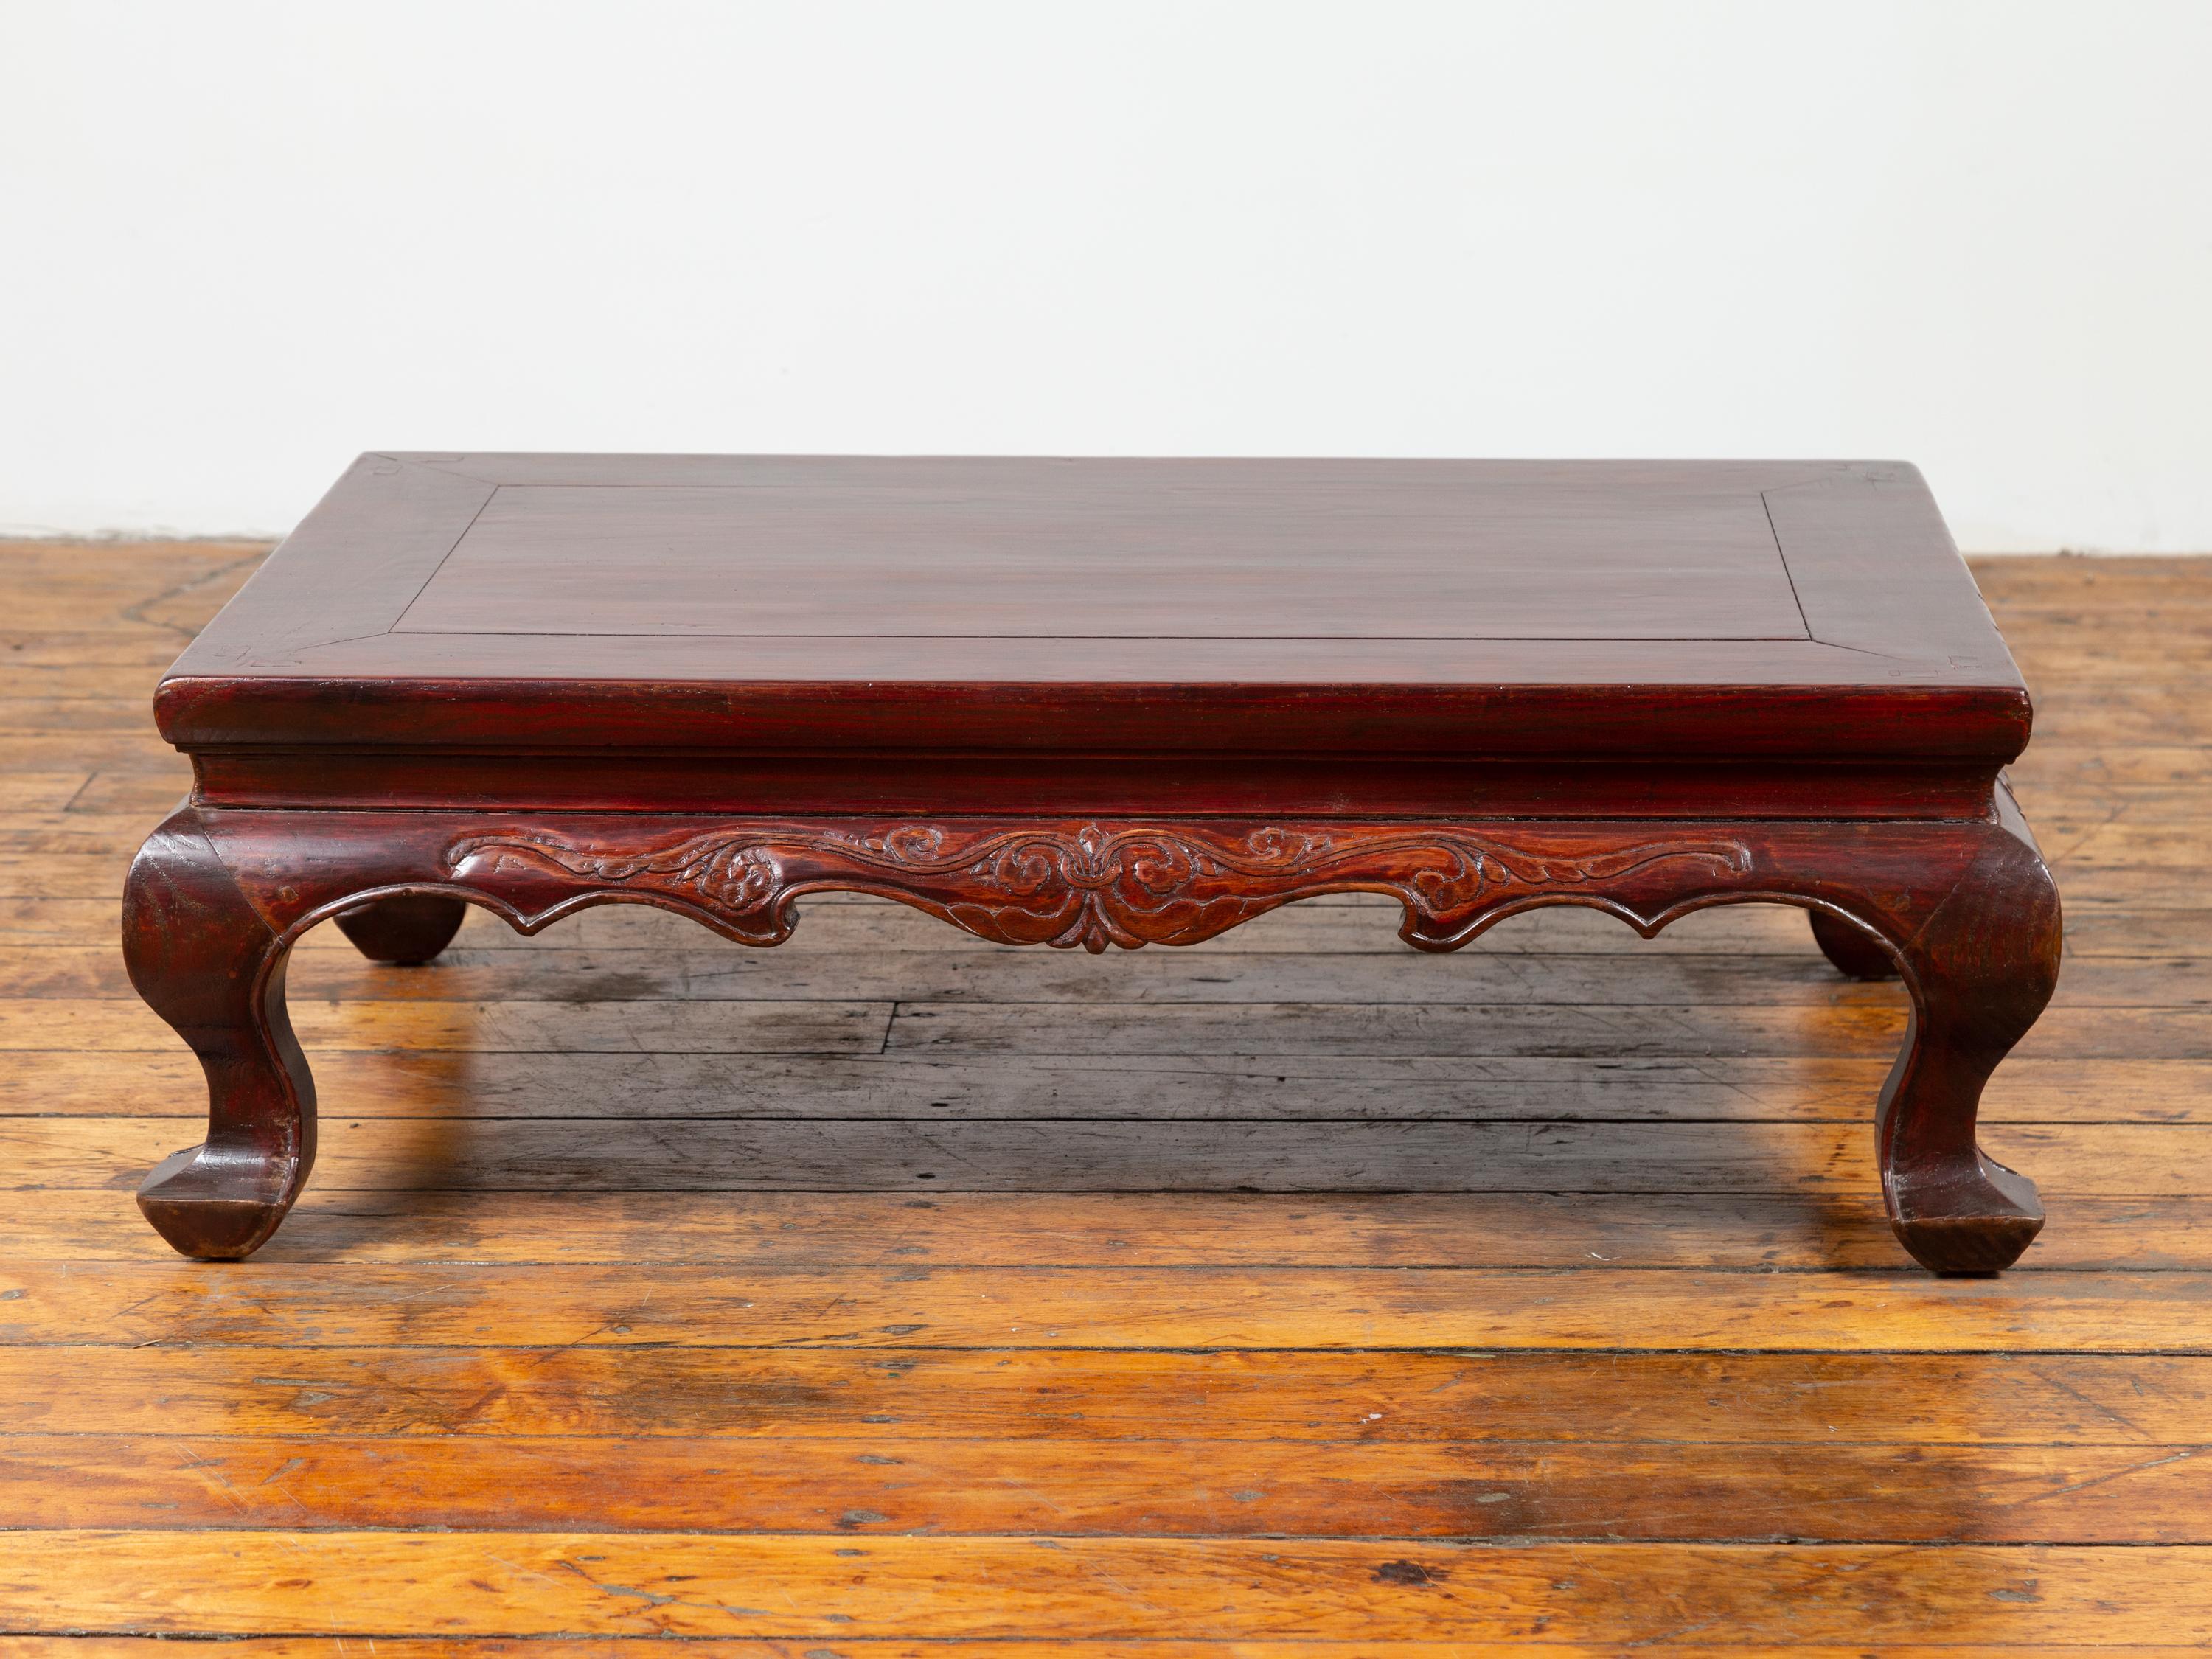 Chinese Qing Dynasty 19th Century Lacquered Wood Low Table with Cabriole Legs For Sale 3